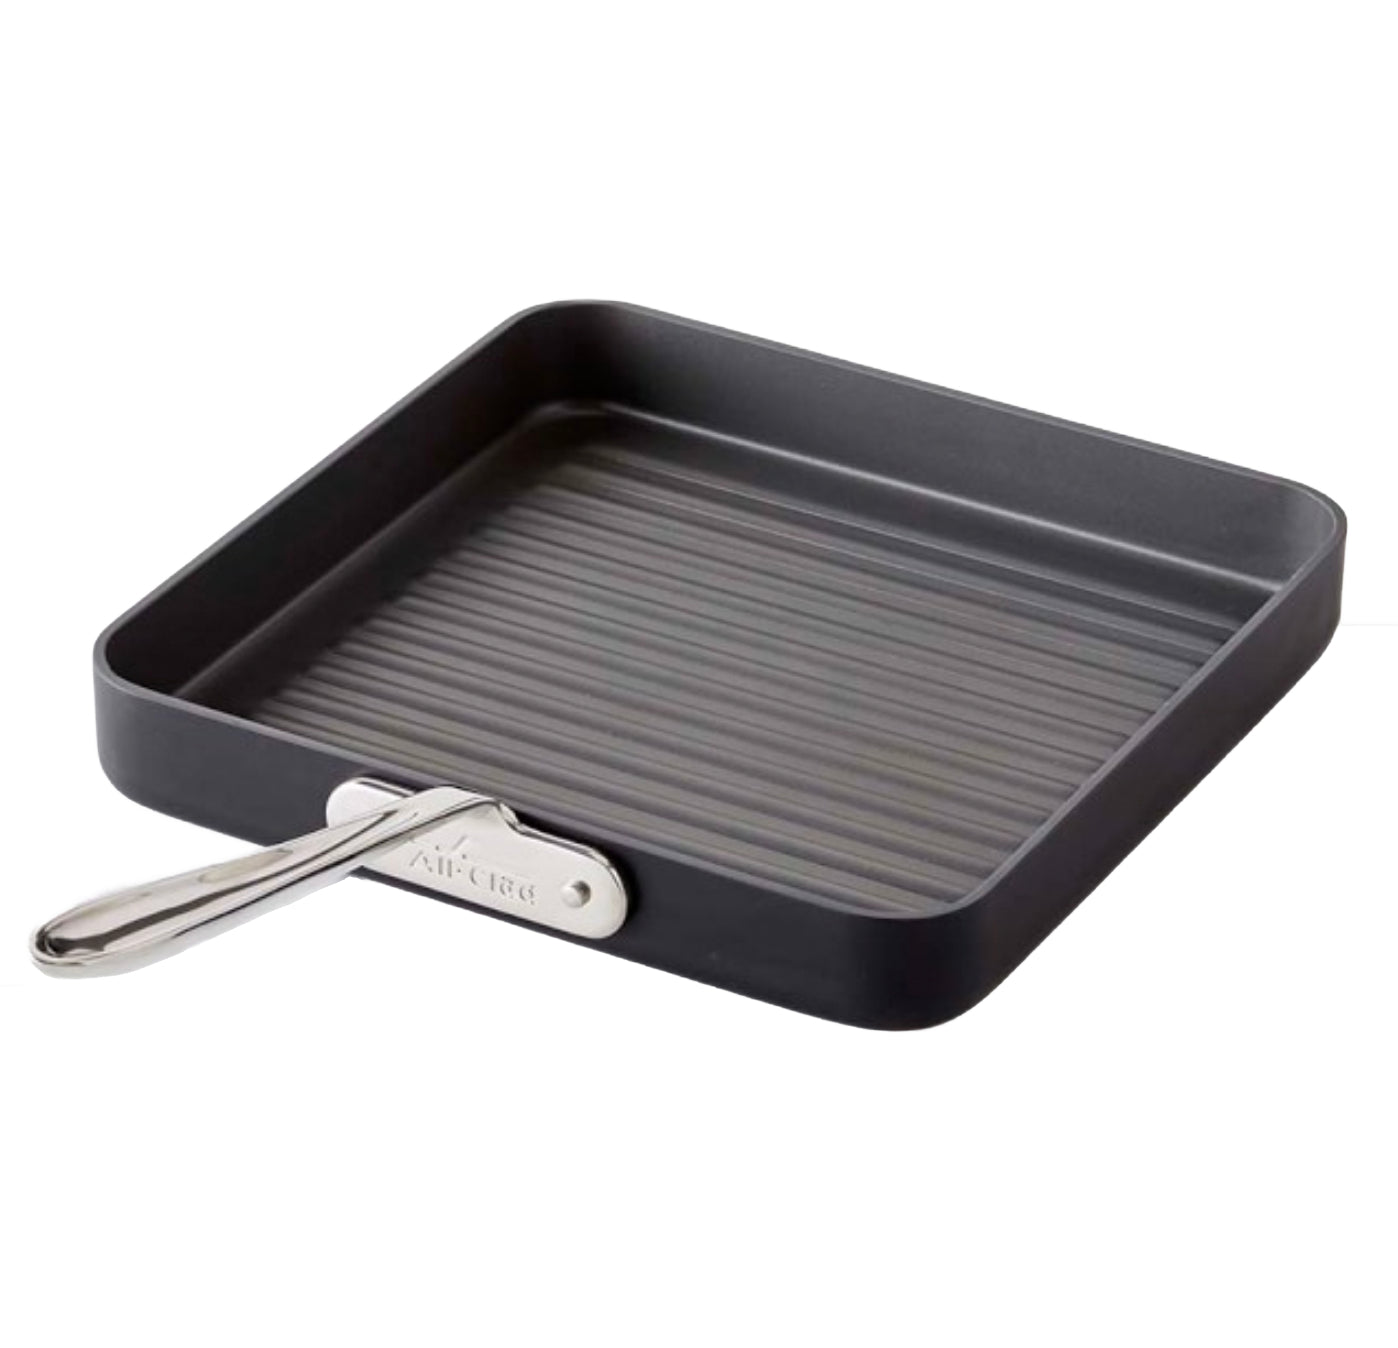 All-Clad NS1 Nonstick Square Grill – 11"